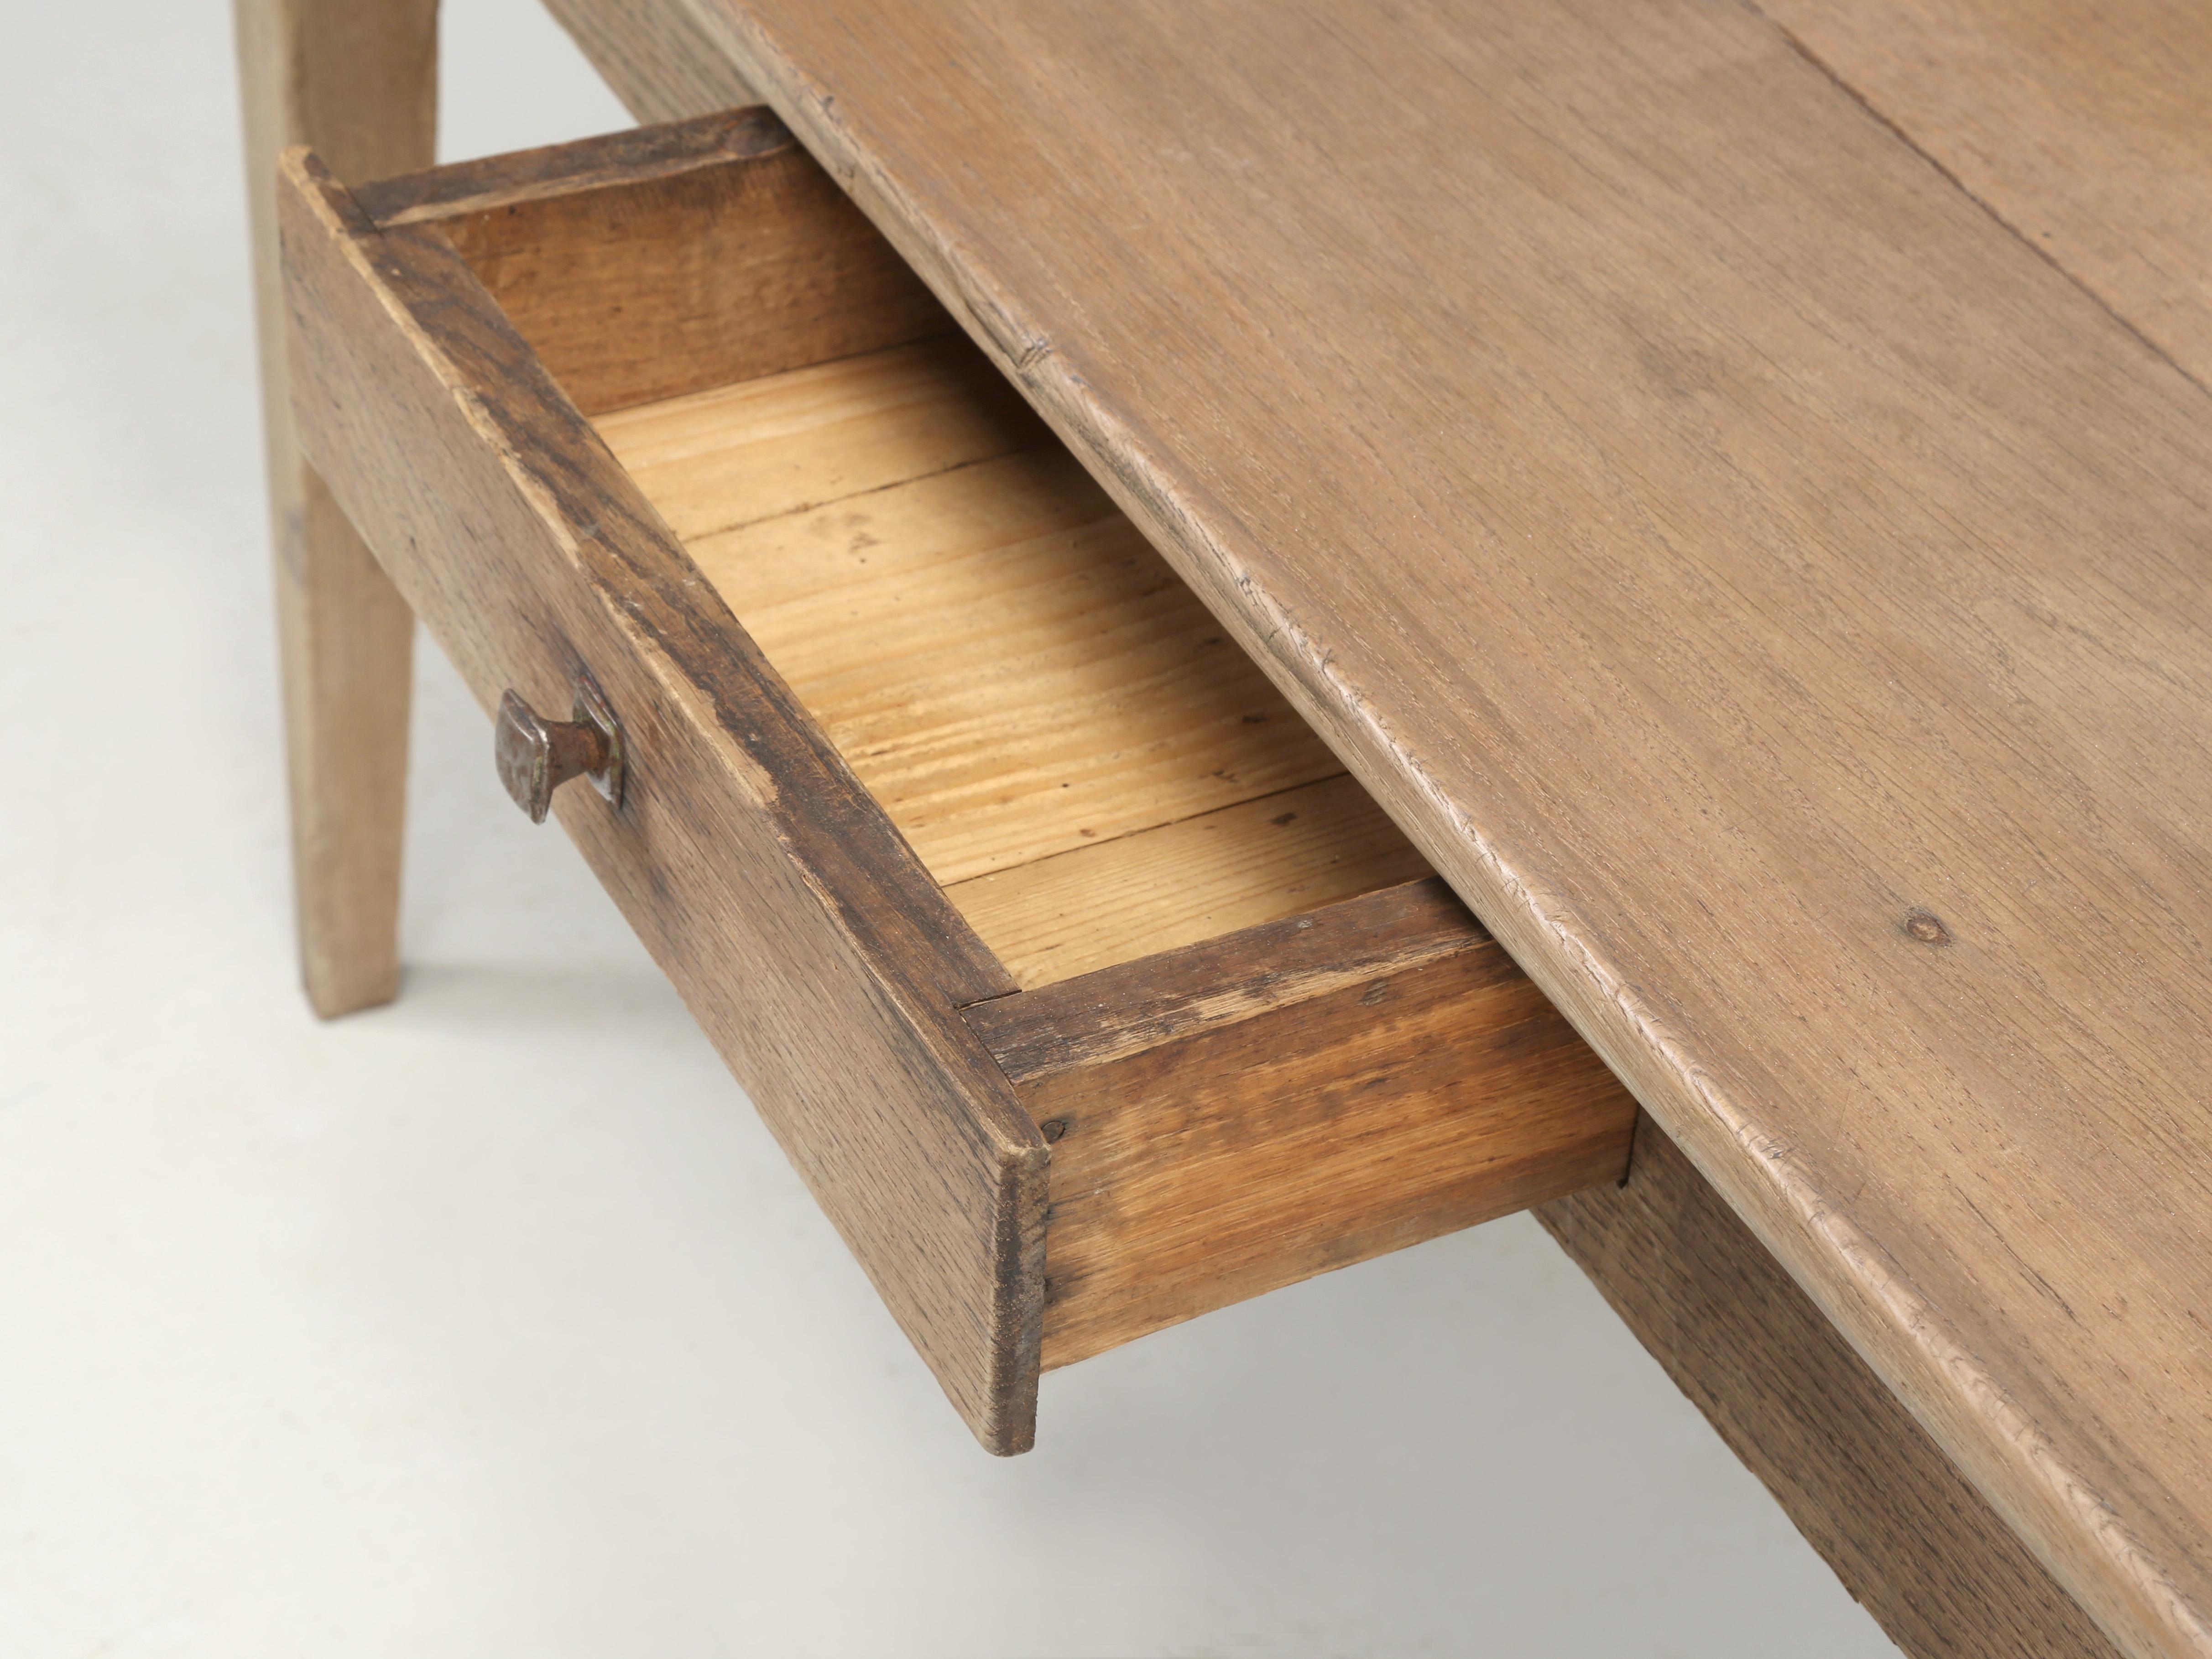 Late 19th Century French Oak Farm Table with Tapered Legs 1800's Original Unrestored Condition